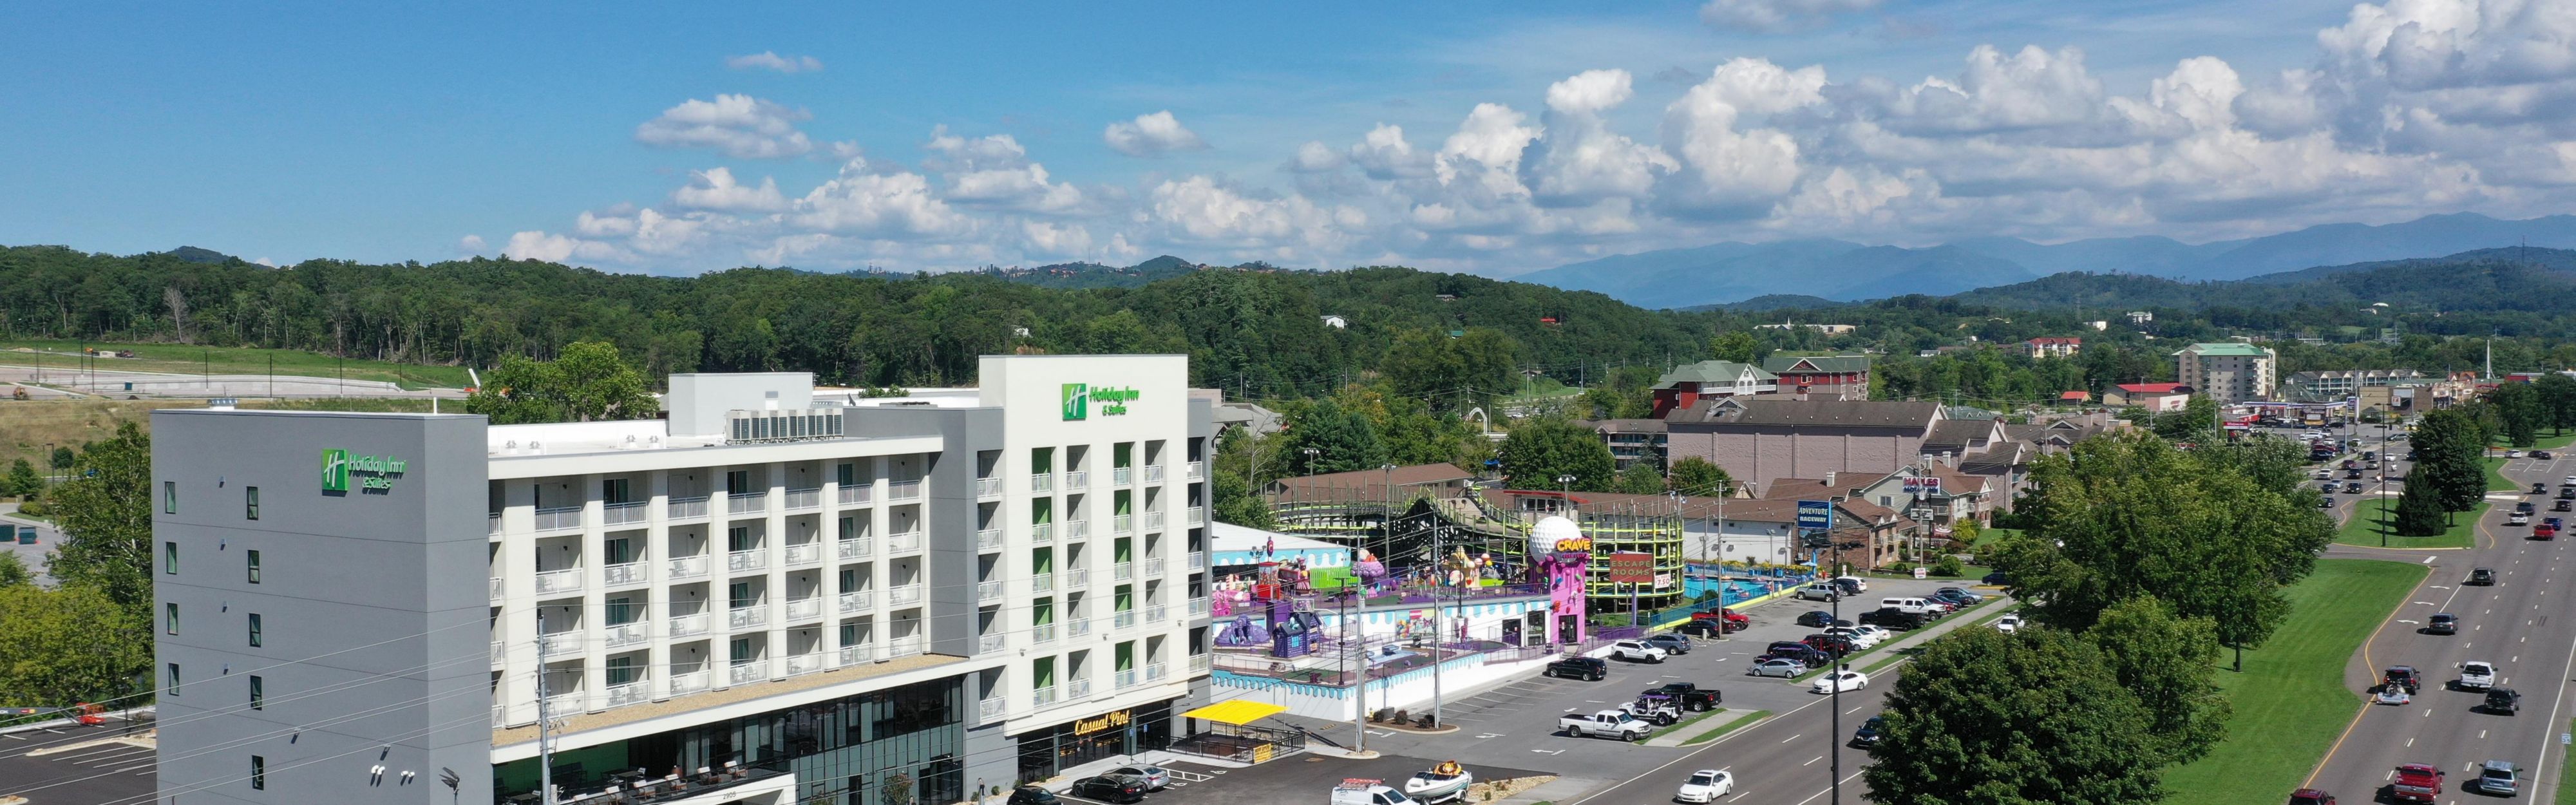 Holiday Inn Hotel And Suites Pigeon Forge 6590601960 16x5